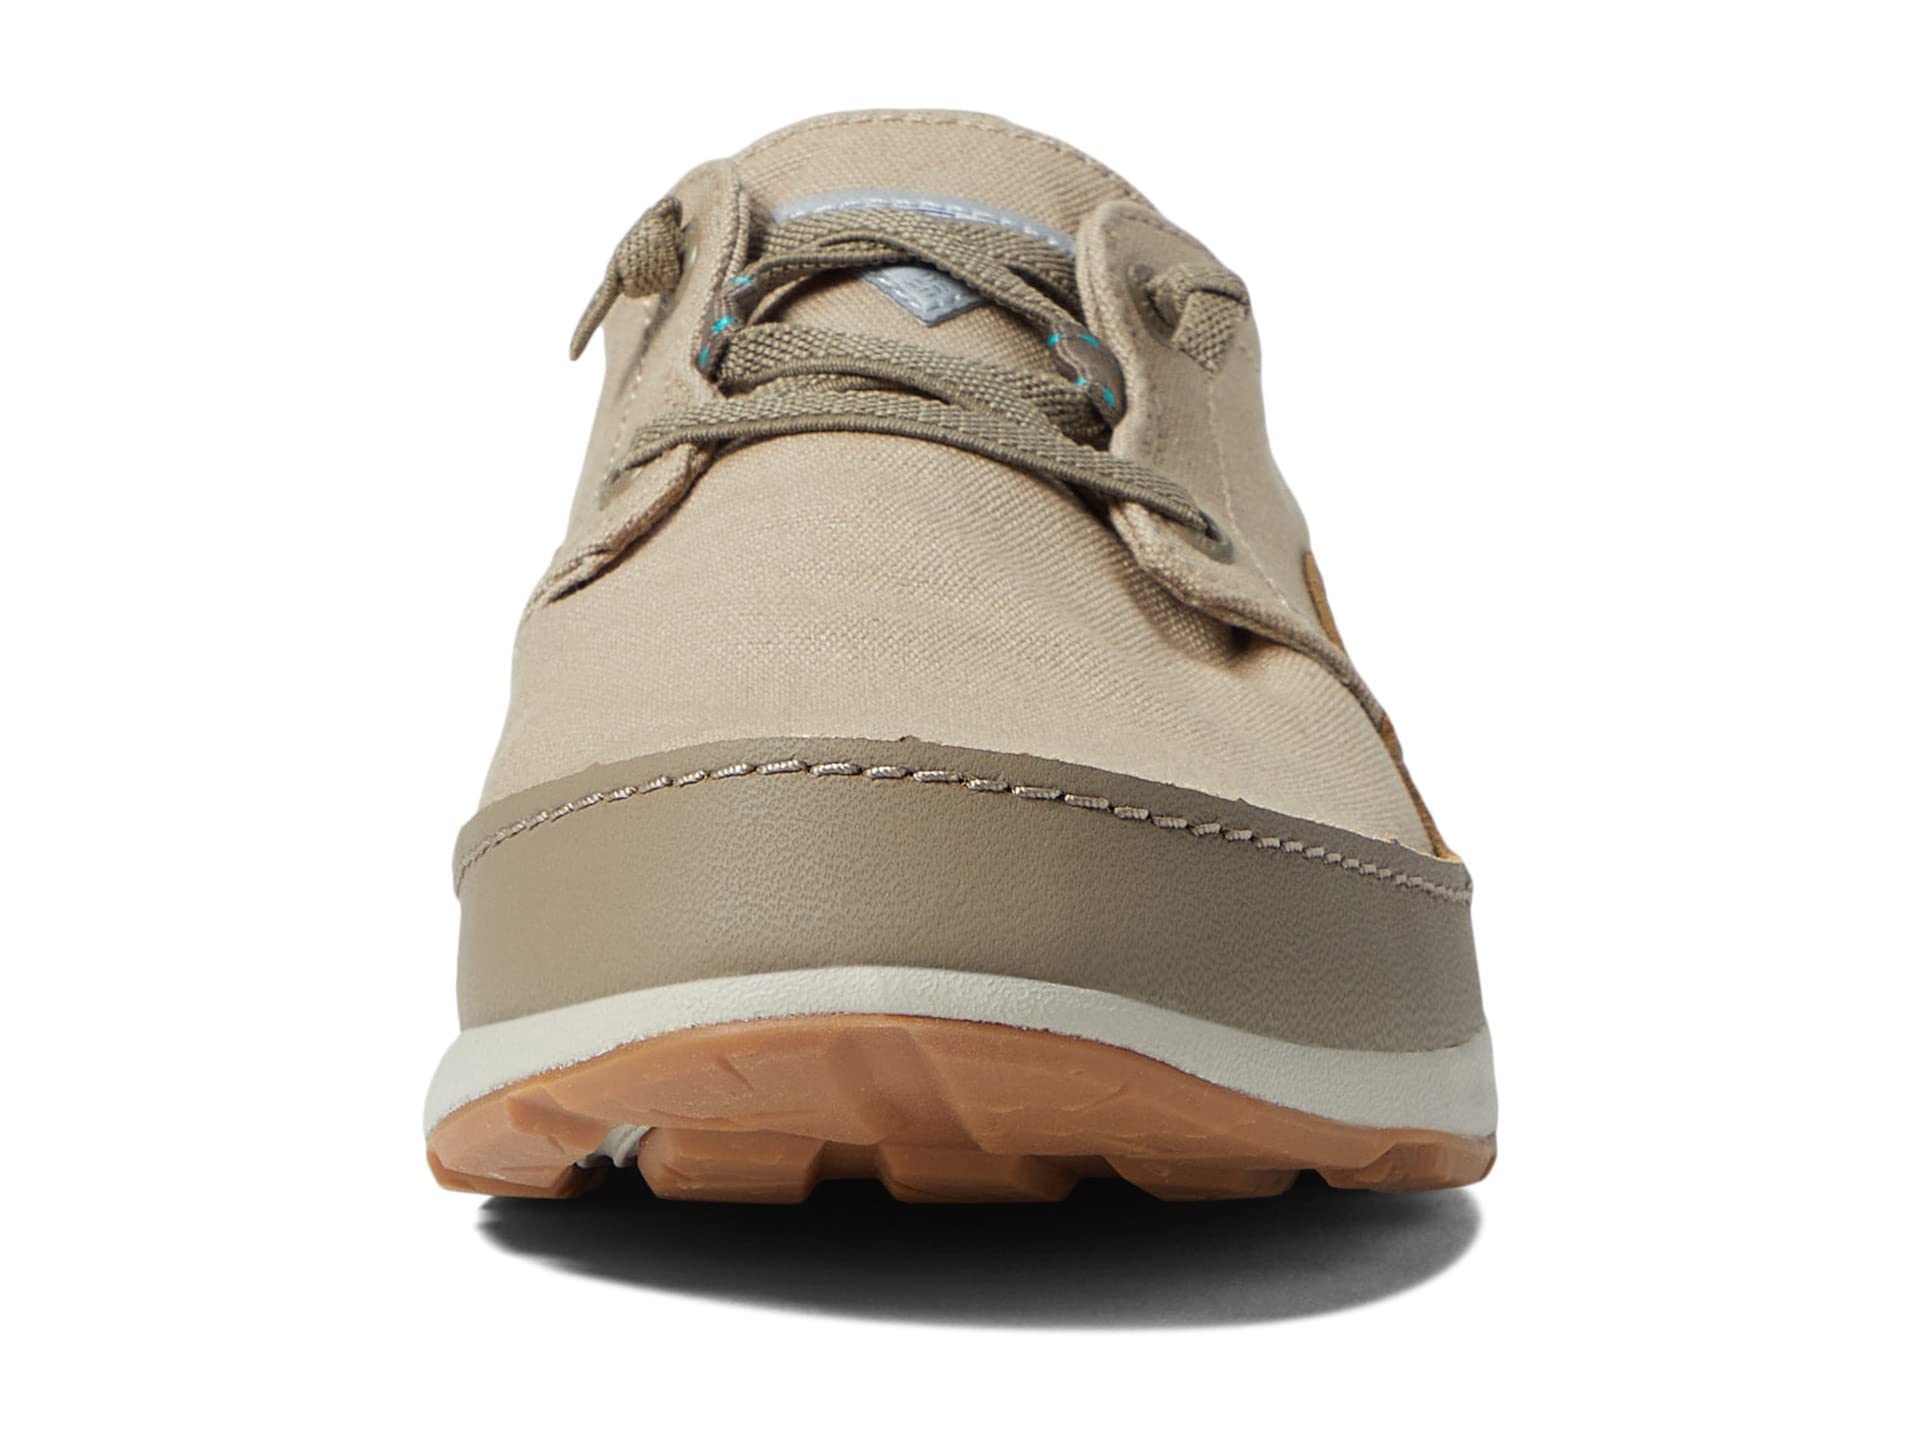 Columbia Men's Bahama Vent PFG Lace Relaxed Boat Shoe